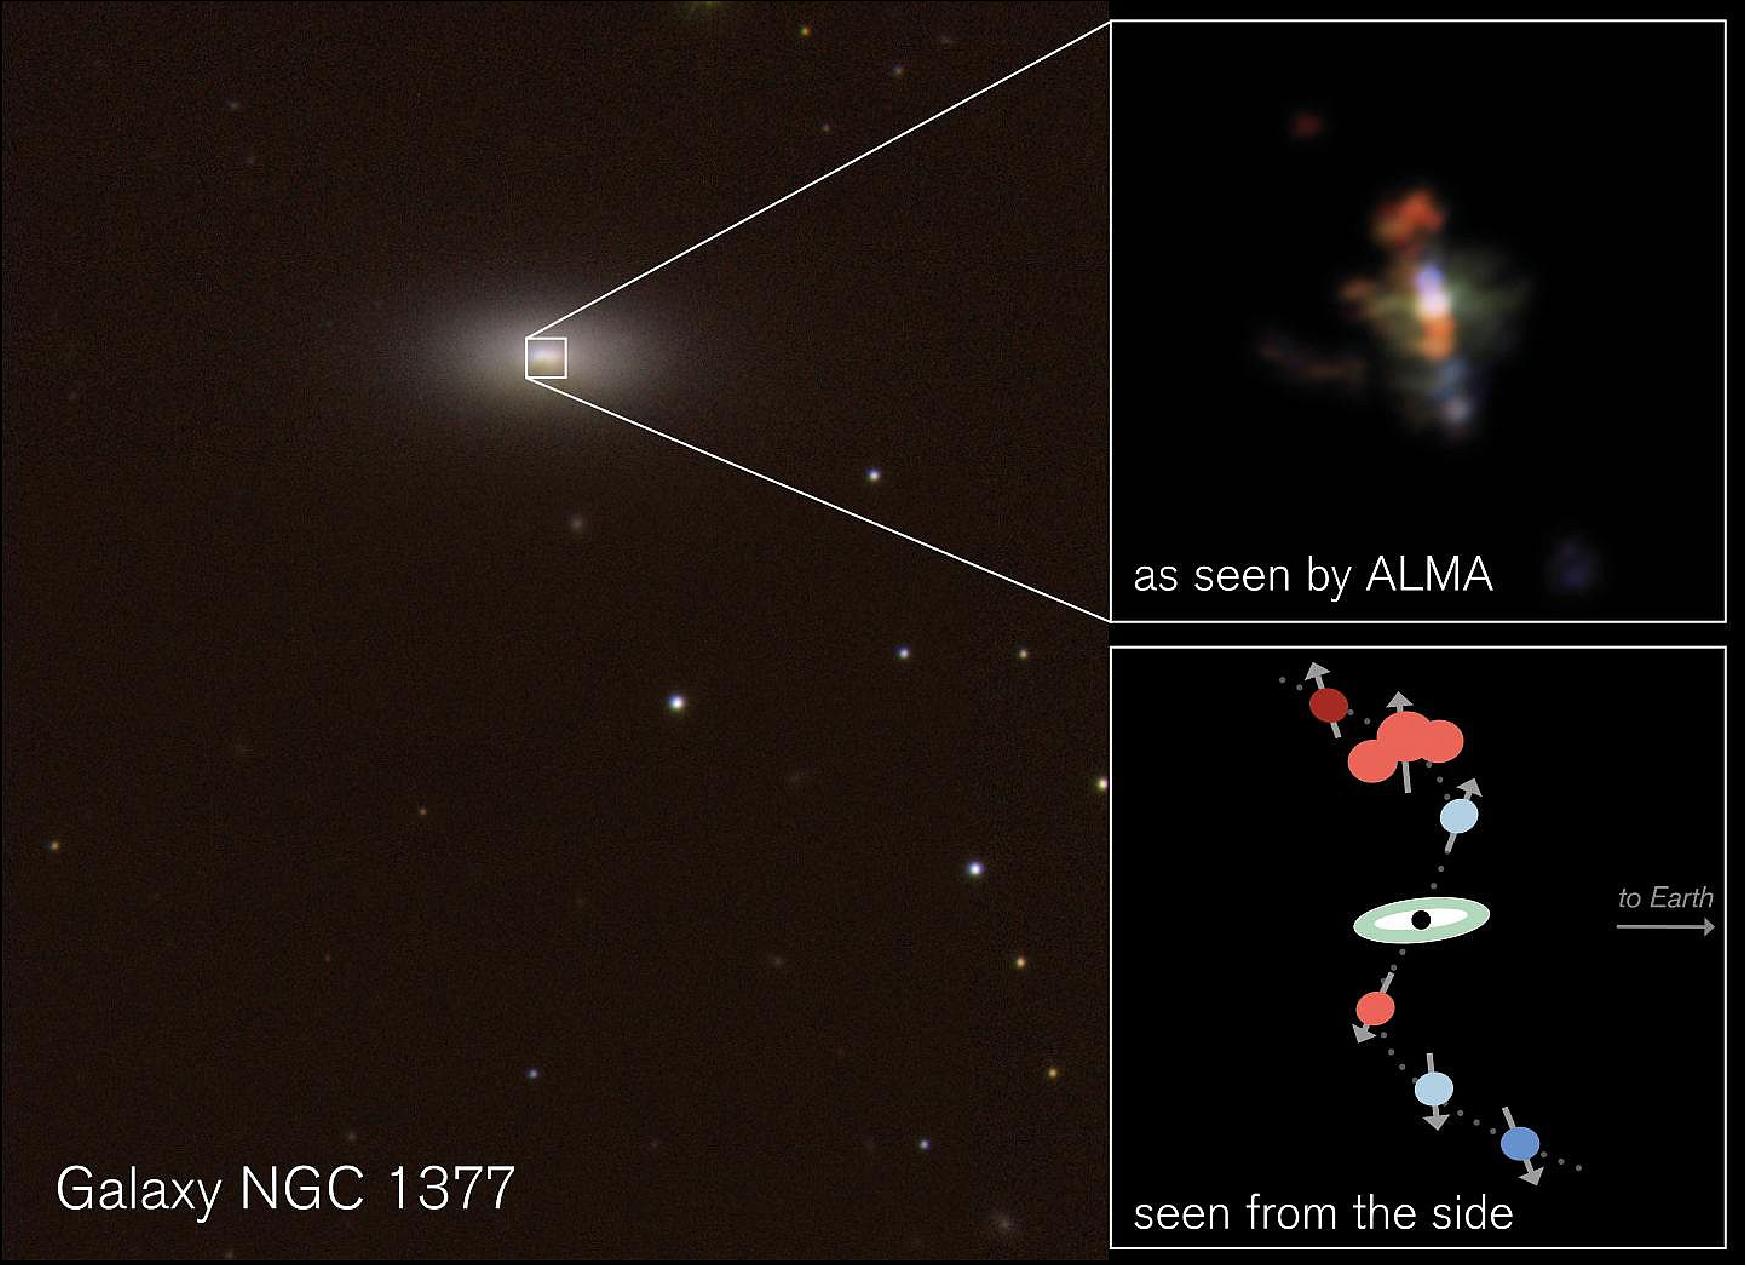 Figure 49: Alma's close-up view of the center of galaxy NGC 1377 (upper left) reveals a swirling jet. In this color-coded image, reddish gas clouds are moving away from us, bluish clouds towards us, relative to the galaxy's center. The Alma image shows light with wavelength around one millimeter from molecules of carbon monoxide (CO). A cartoon view (lower right) shows how these clouds are moving, this time seen from the side. The background color image of NGC 1377 and its surroundings is a composite made from a visible light images taken at the CTIO 1.5 meter telescope in Chile by H. Roussel et al. [image credit: CTIO/H. Roussel et al./ESO (left panel); Alma/ESO/NRAO/S. Aalto (top right panel); S. Aalto (lower right panel)]